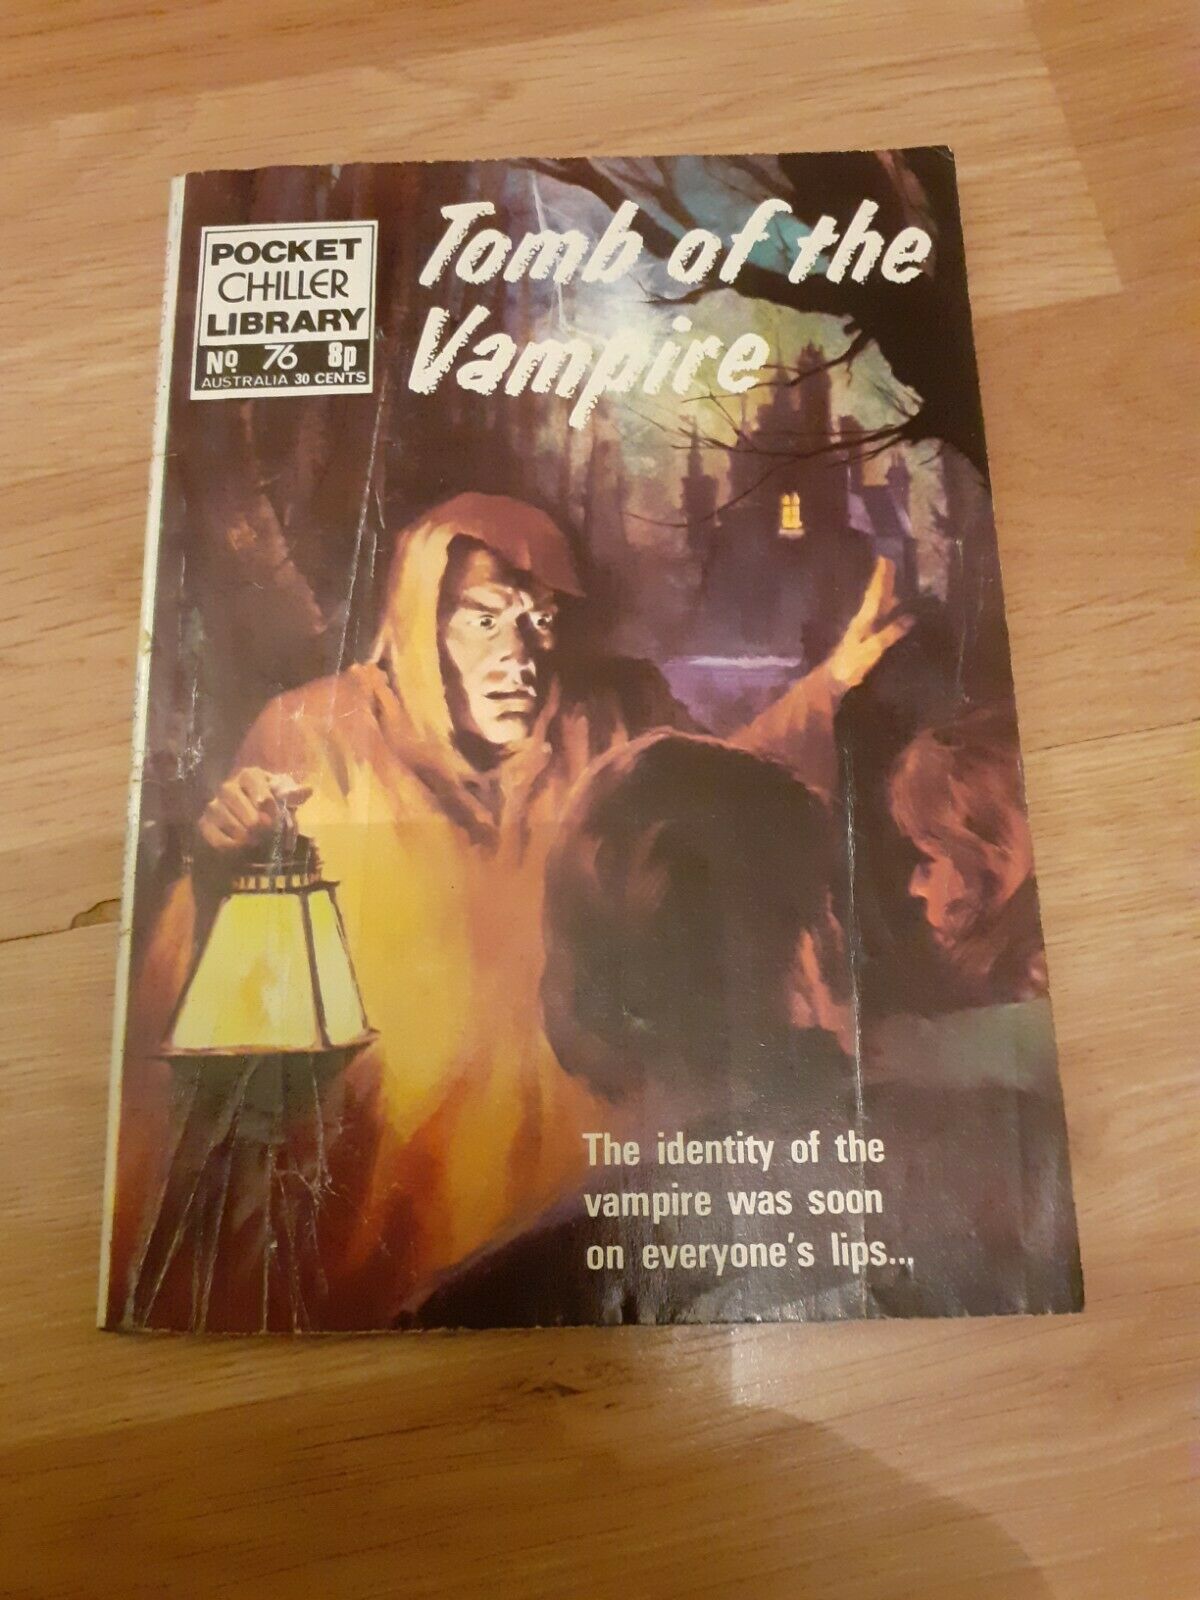 Pocket Chiller library 76 - Tomb of the Vampire